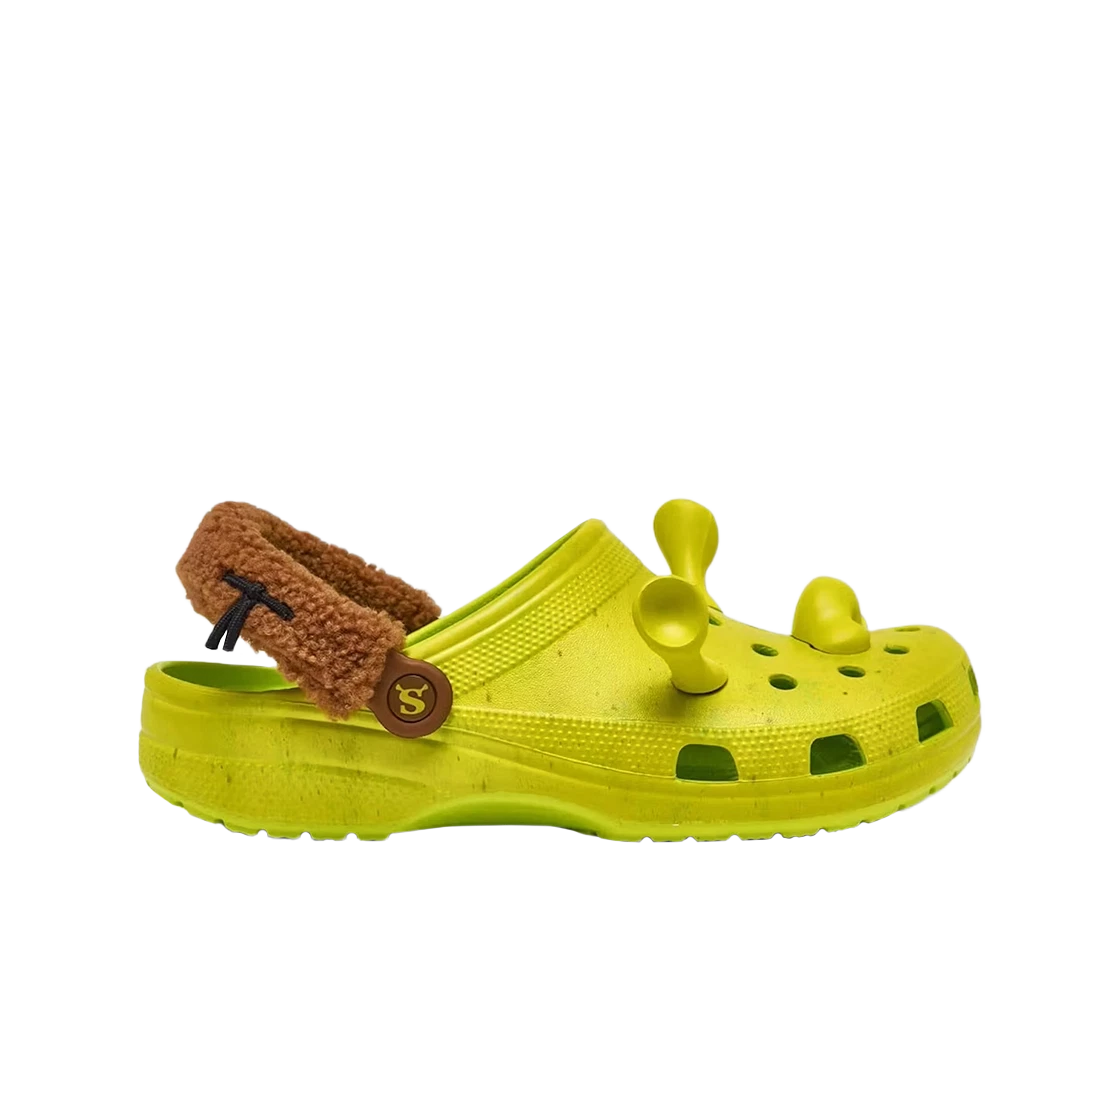 The new DreamWorks x Crocs “Shrek” Classic Clogs are now available